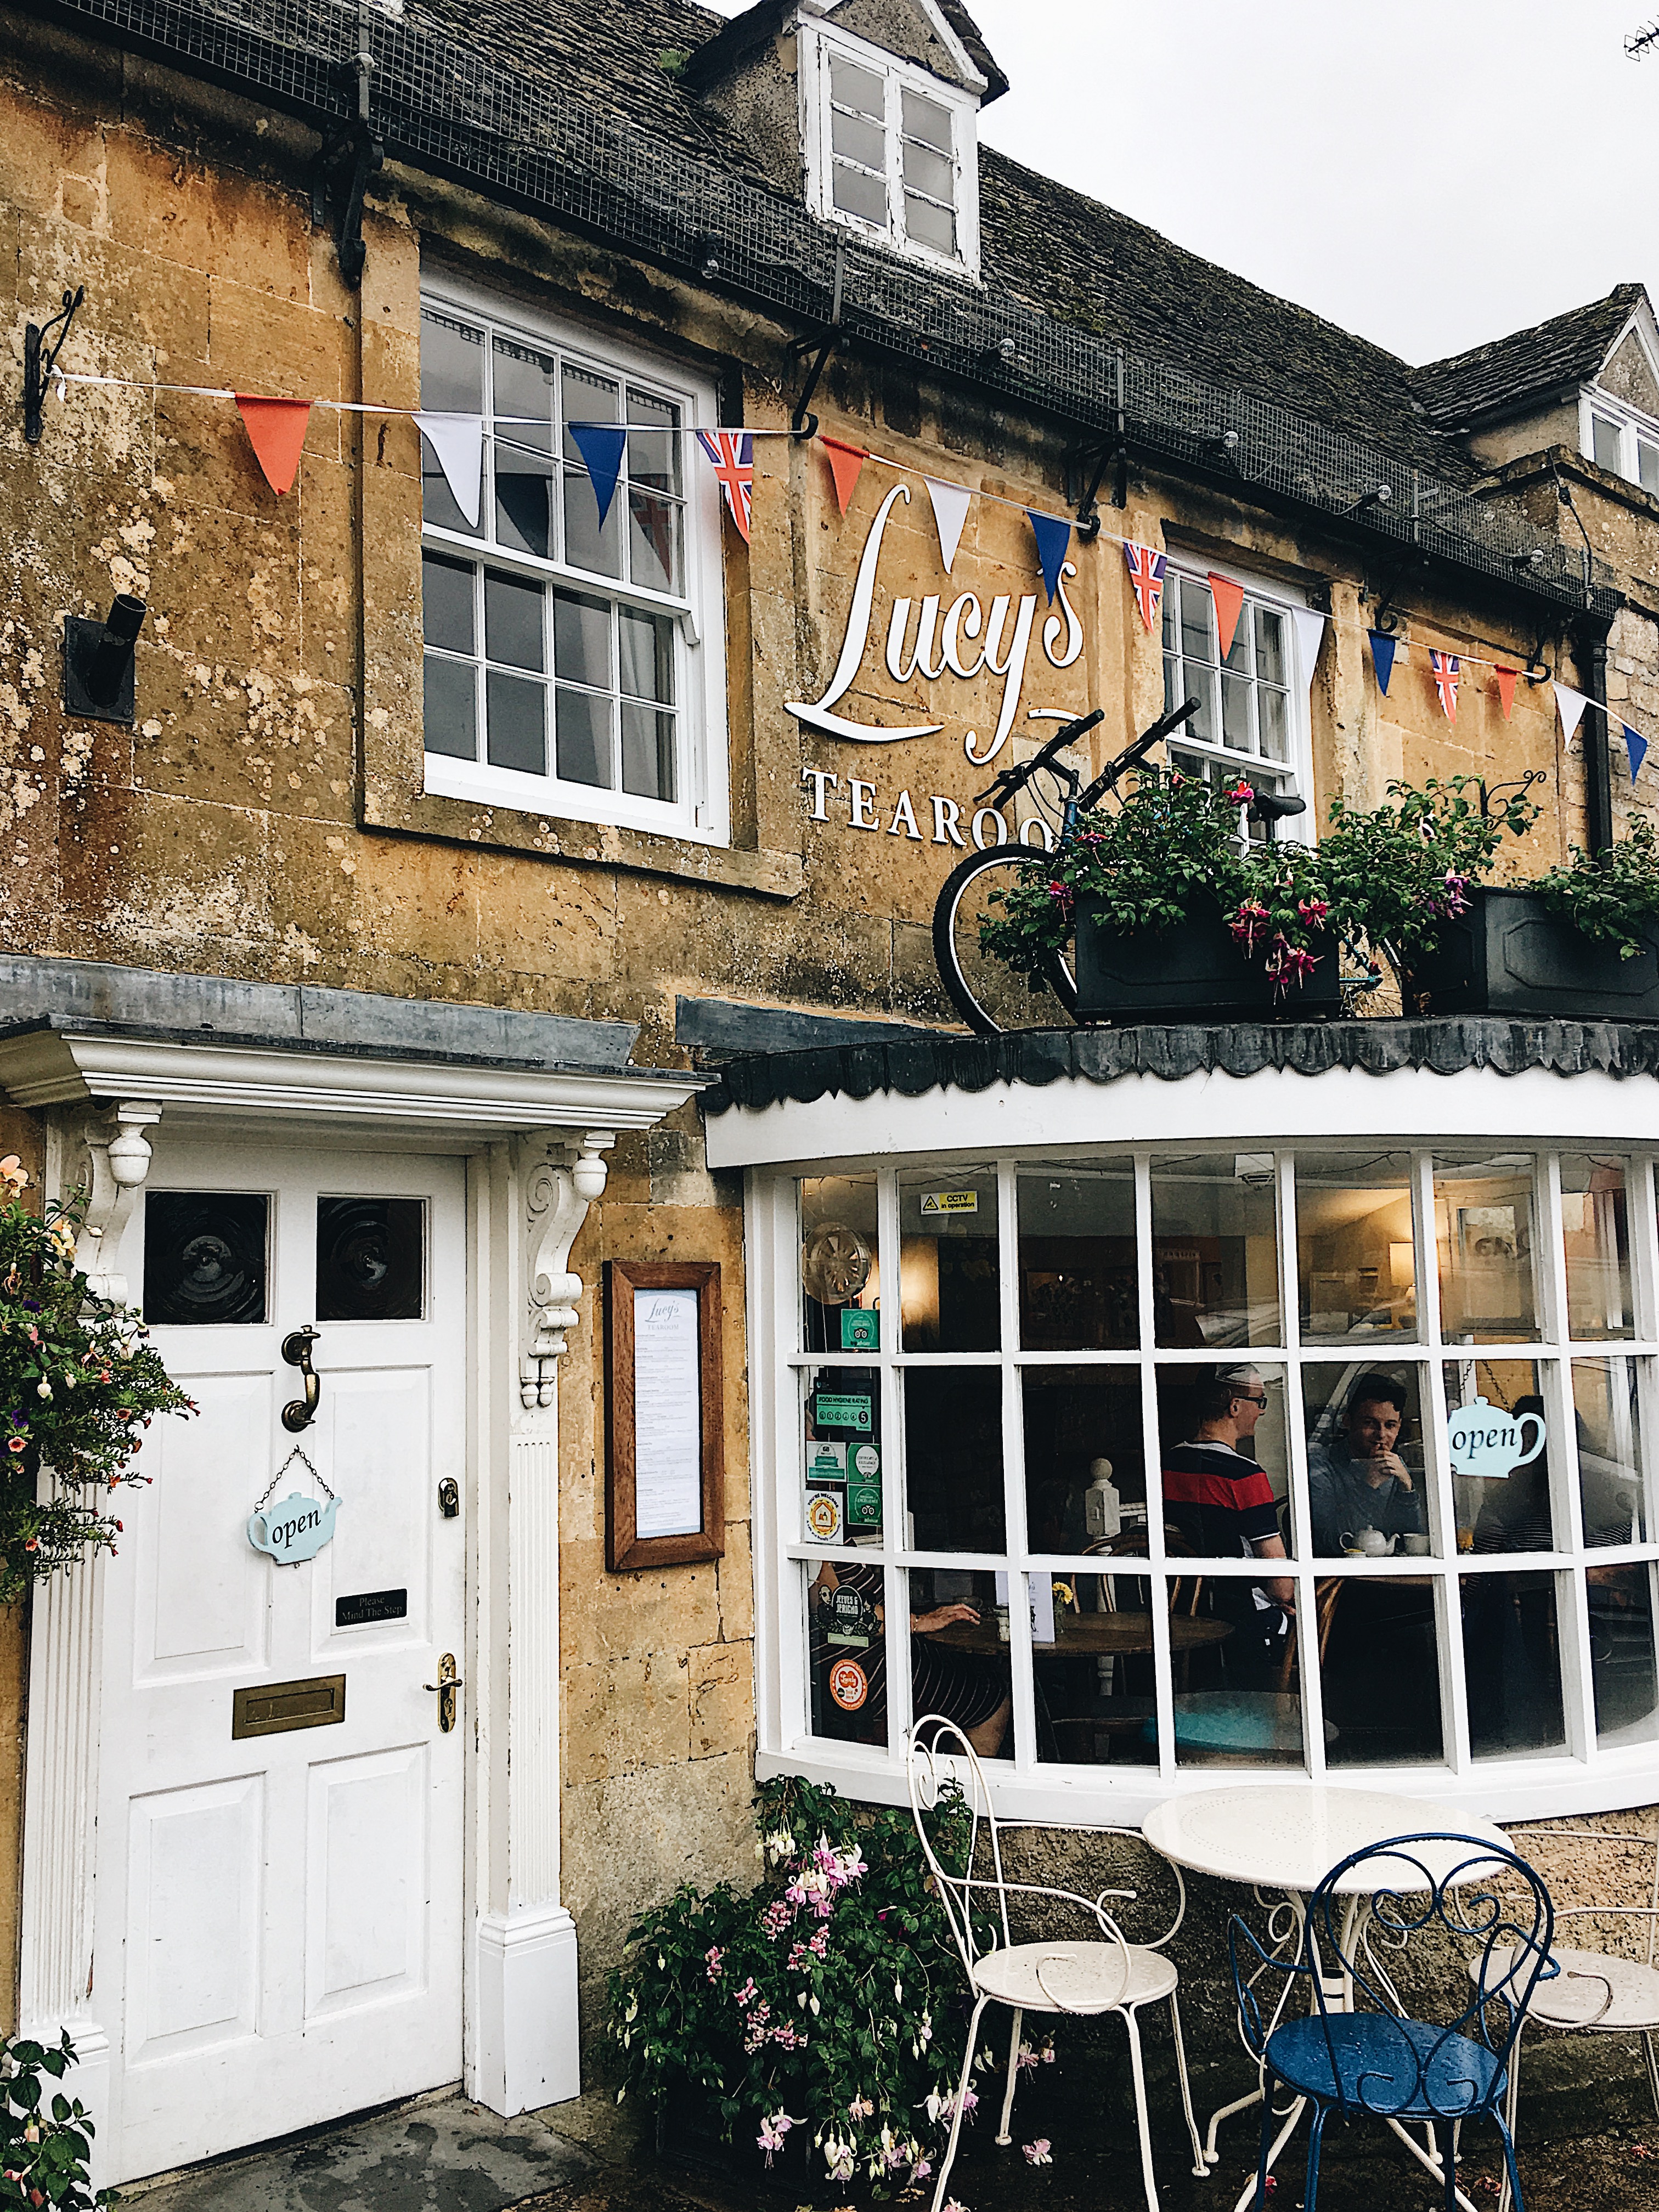 Lucy's tea room in Stow-on-the-wold